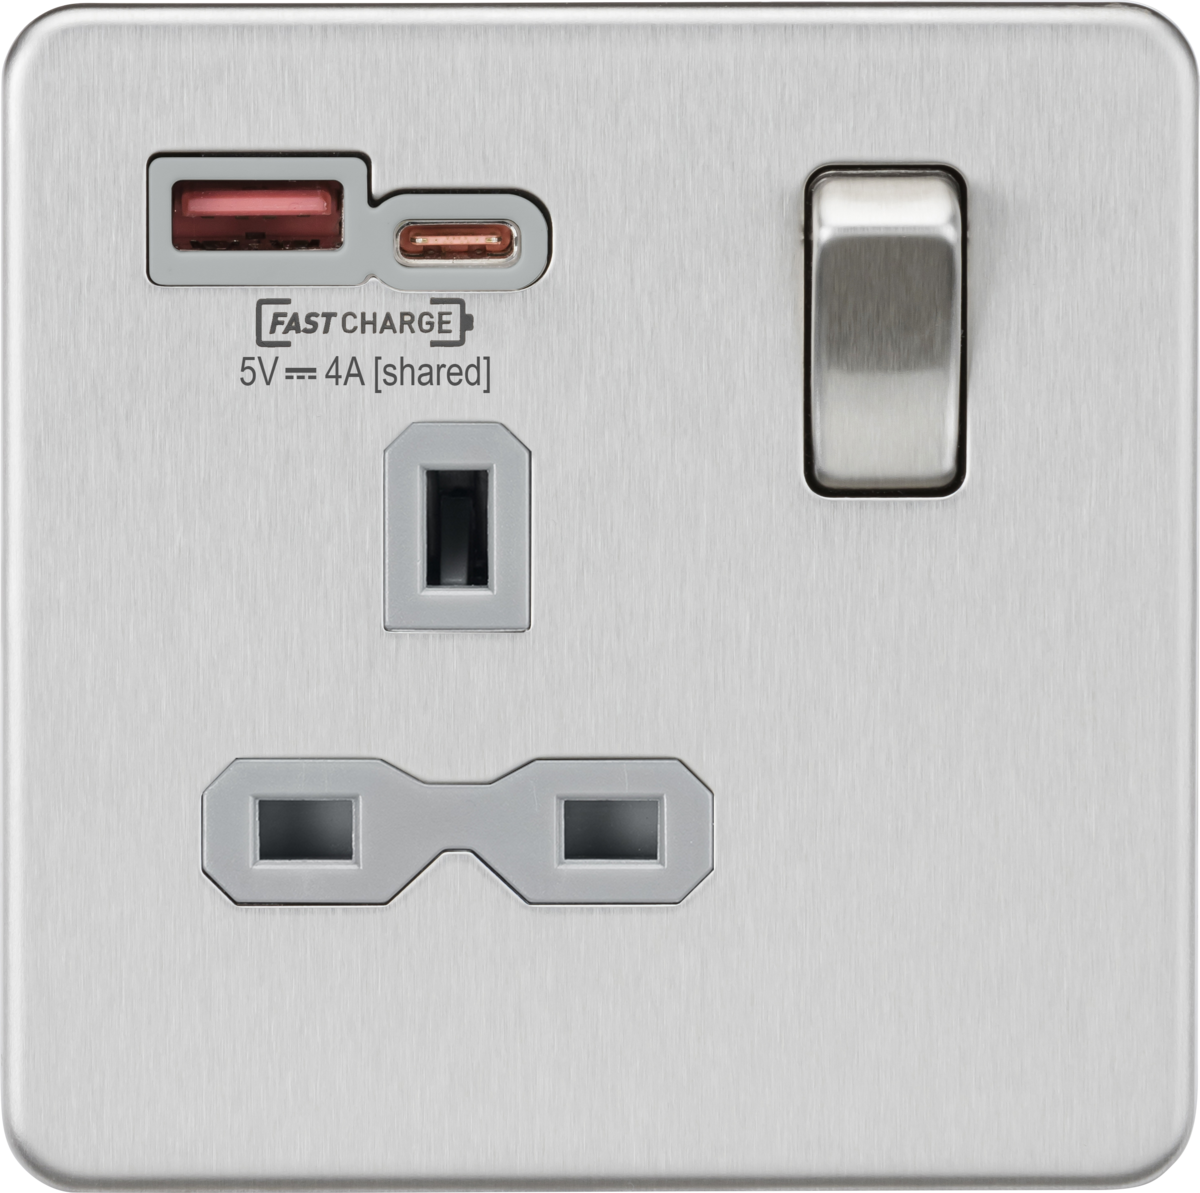 Knightsbridge 13A 1G Switched Socket with dual USB [FASTCHARGE] A+C – Brushed Chrome with grey insert SFR9919BCG - West Midland Electrics | CCTV & Electrical Wholesaler